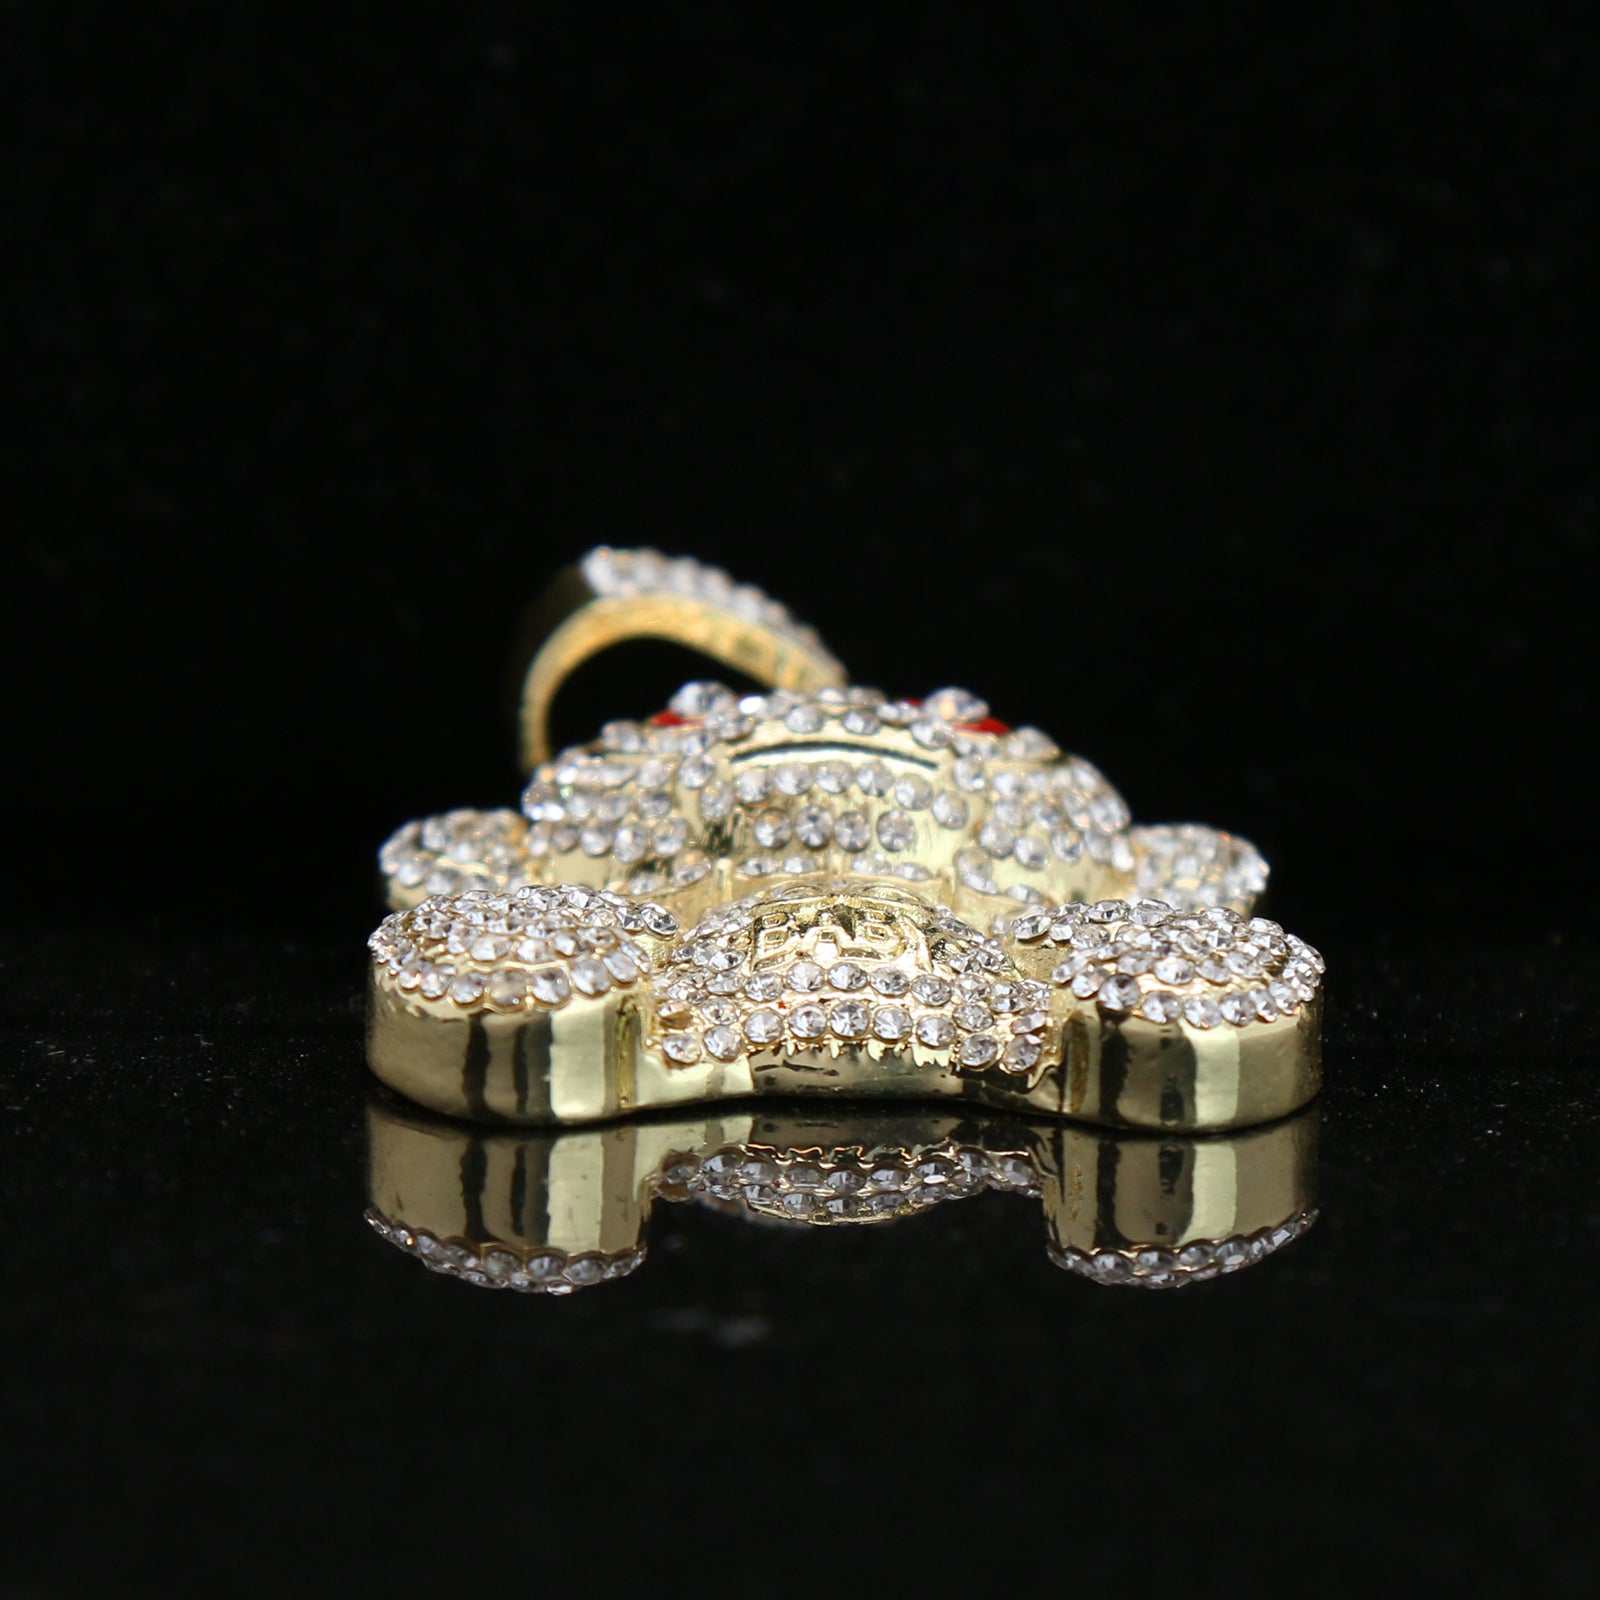 Baby 38 Iced out Pendant Gold Plated Franco Chain 4mm 24"